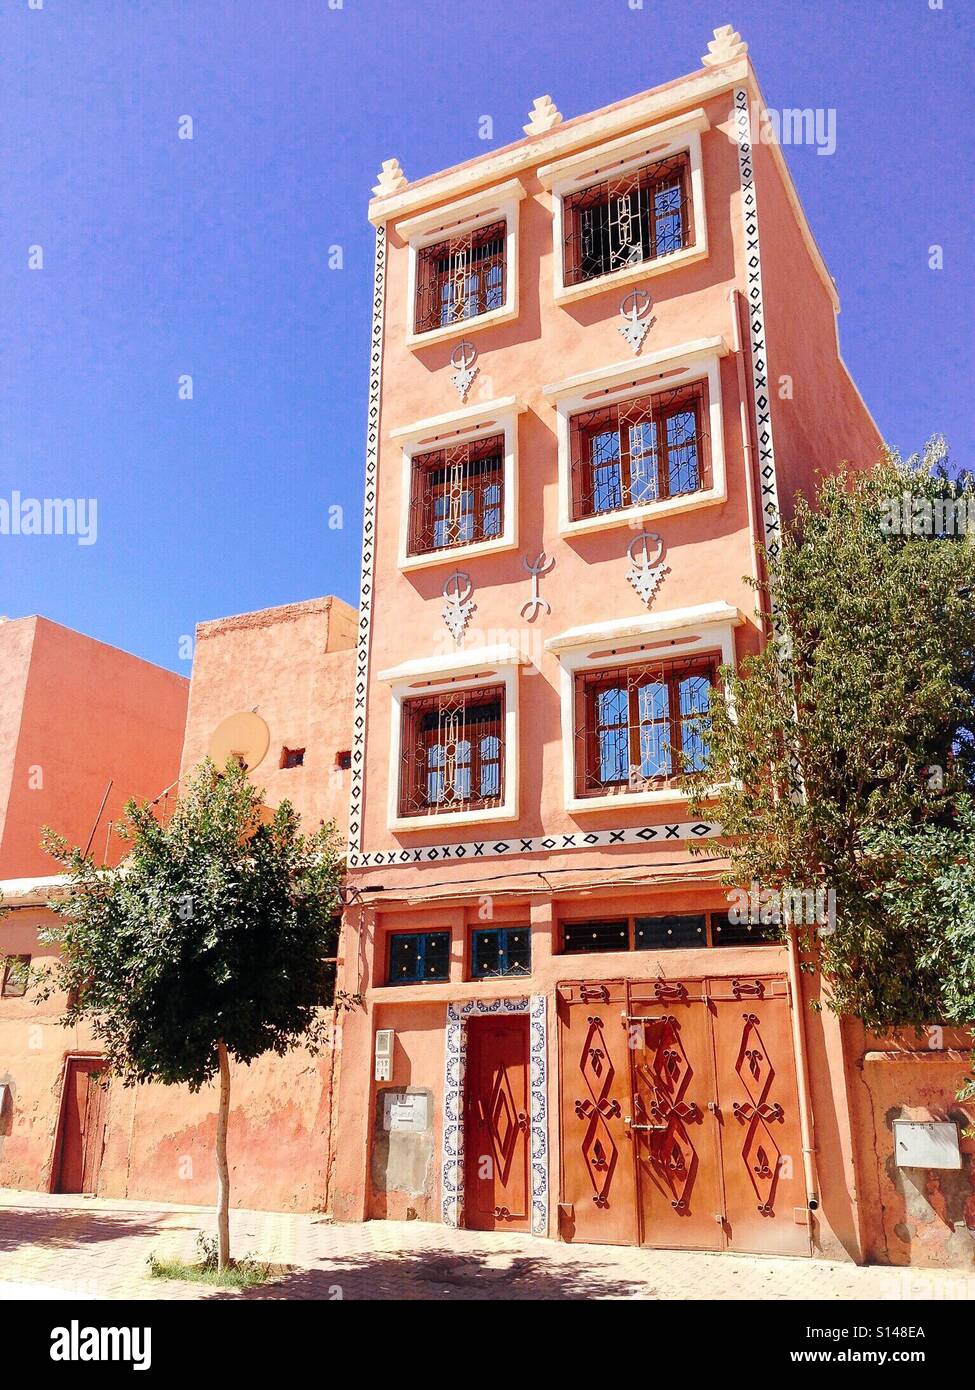 Elaborate building in the Anti Atlas Mountains of Morocco. Stock Photo